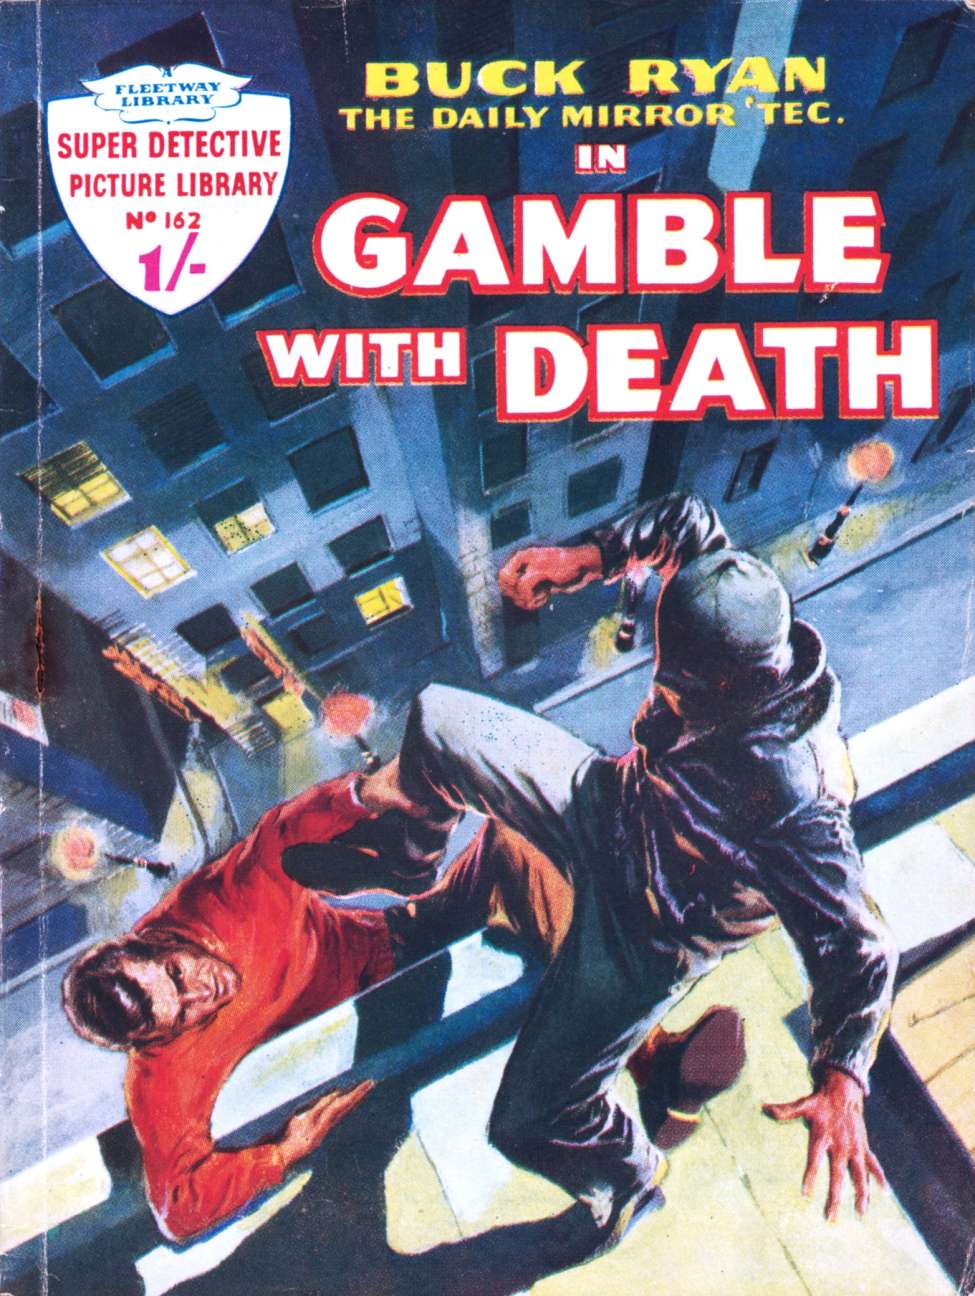 Book Cover For Super Detective Library 162 - Buck Ryan in Gamble With Death